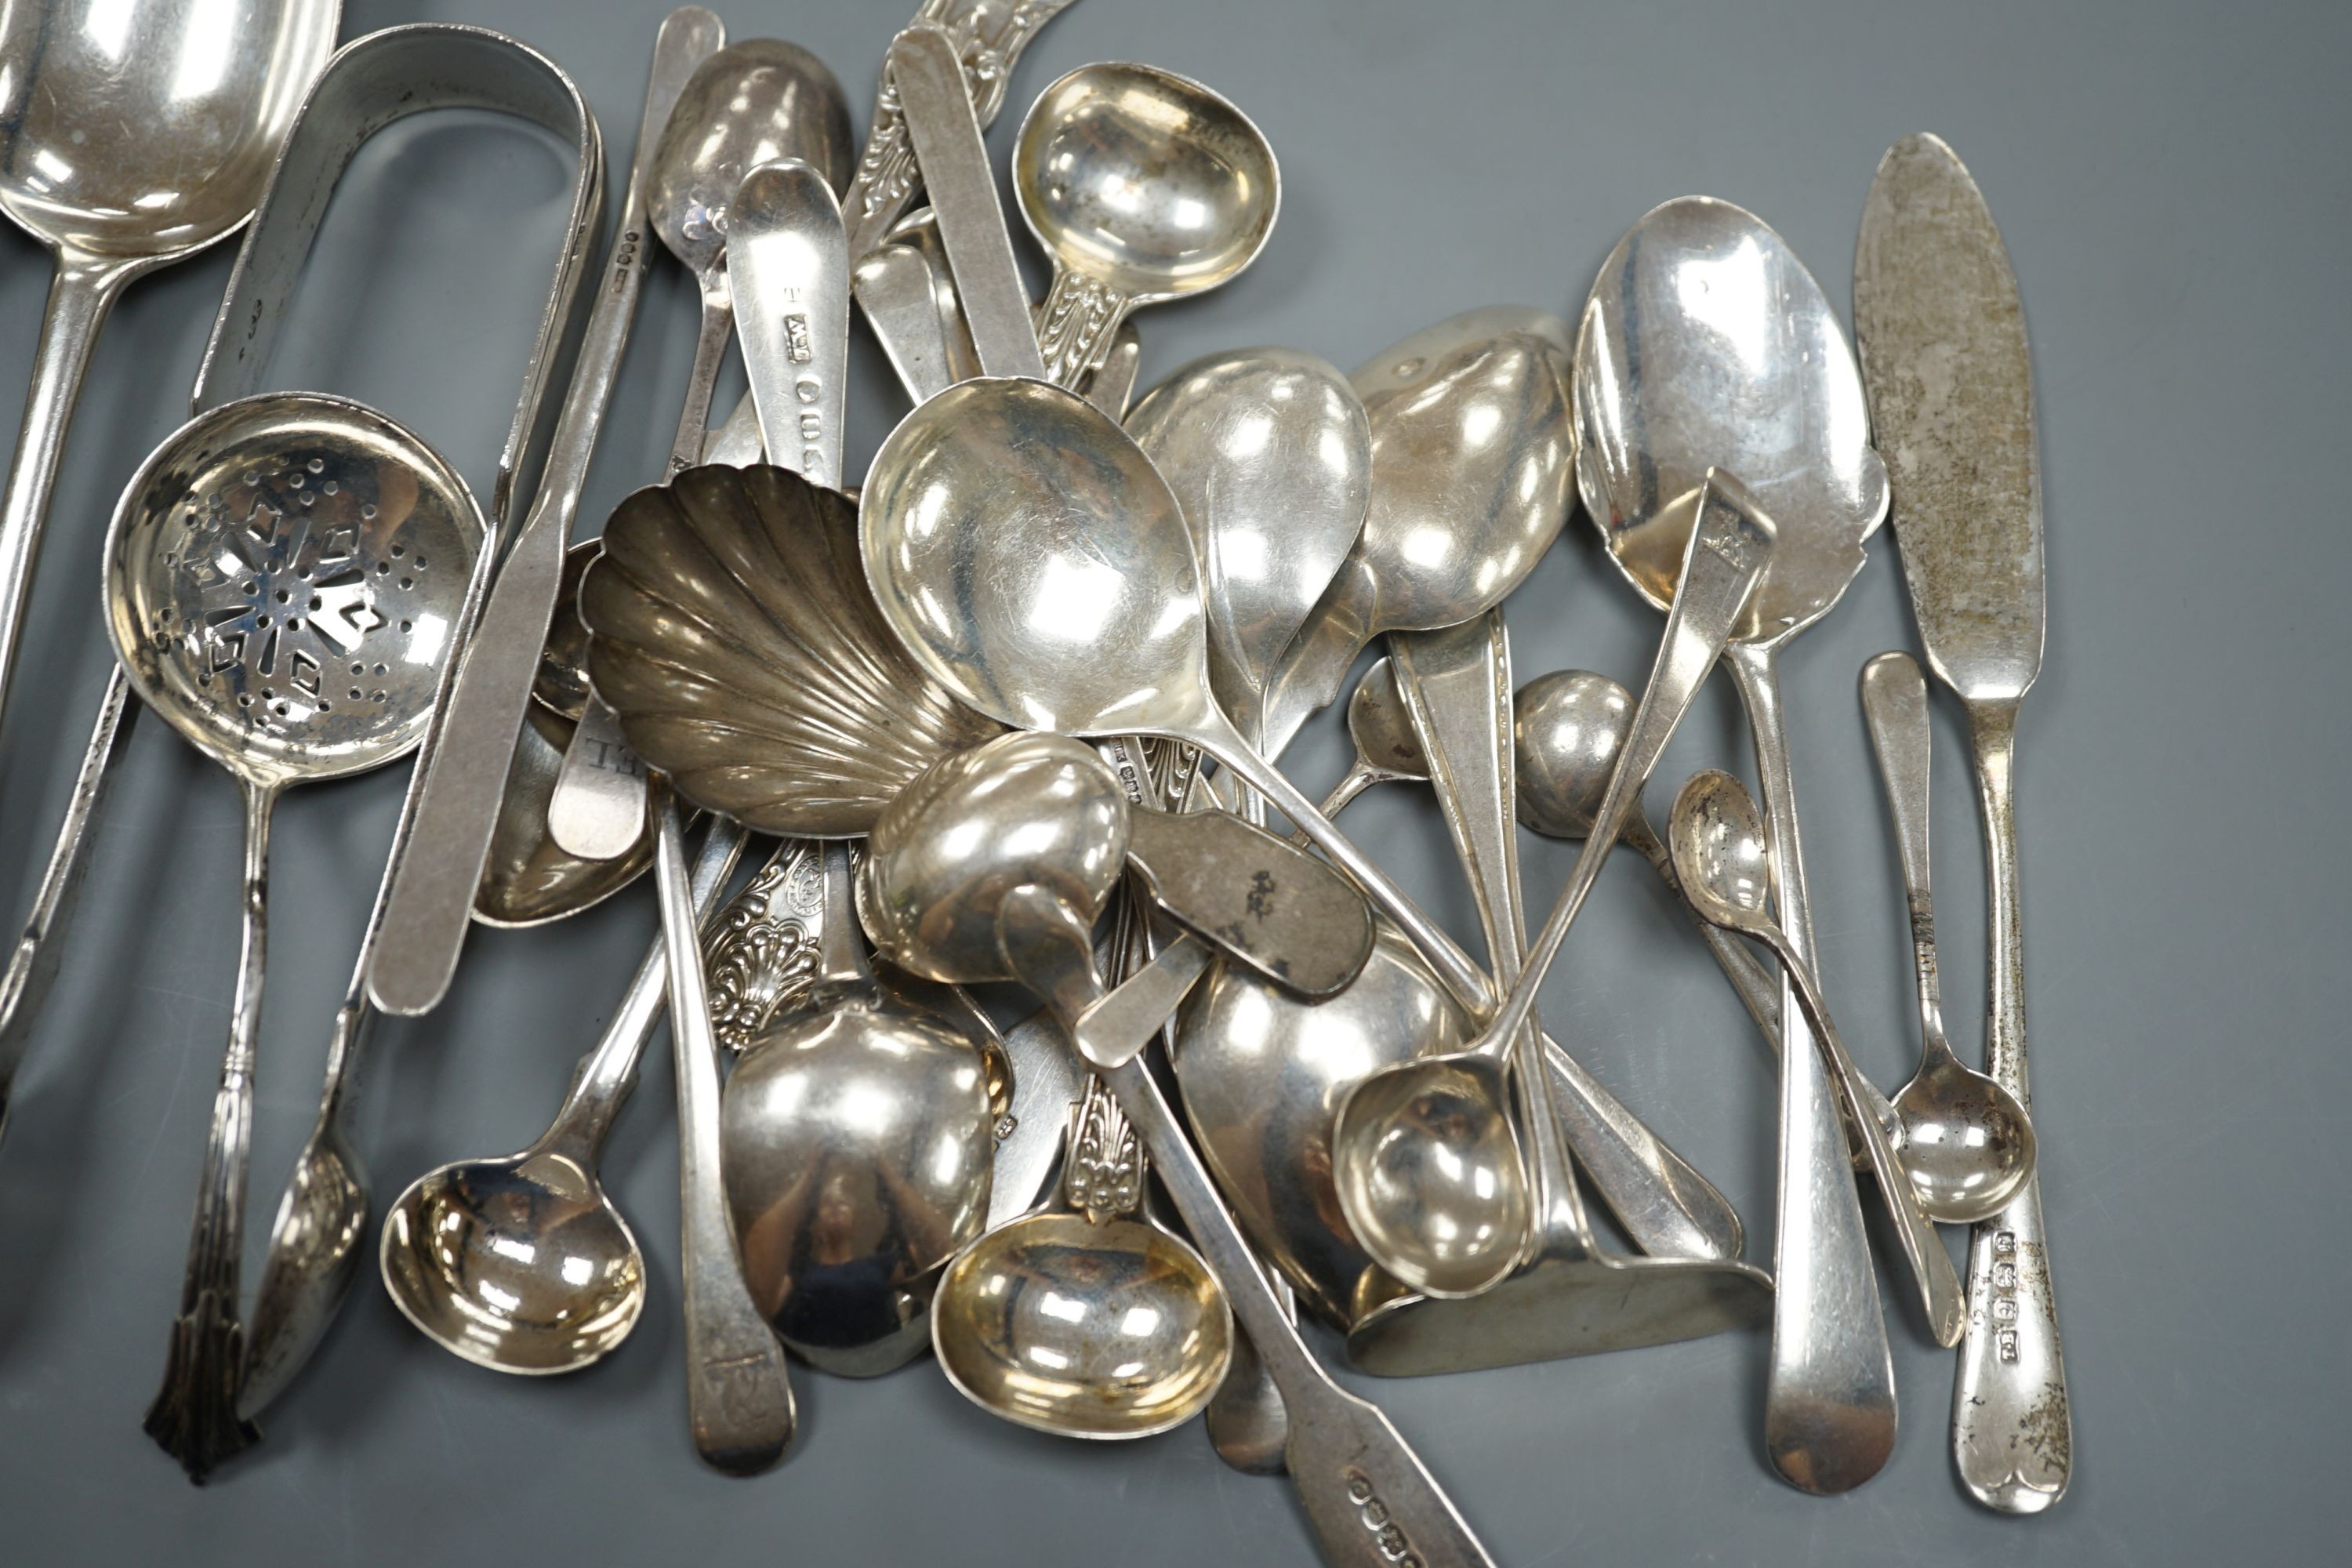 A quantity of assorted mainly 19th century and later flatware, including two Georgian caddy spoons, Victorian tablespoons, an 18th century tablespoon and assorted condiment spoons, various dates and maker's